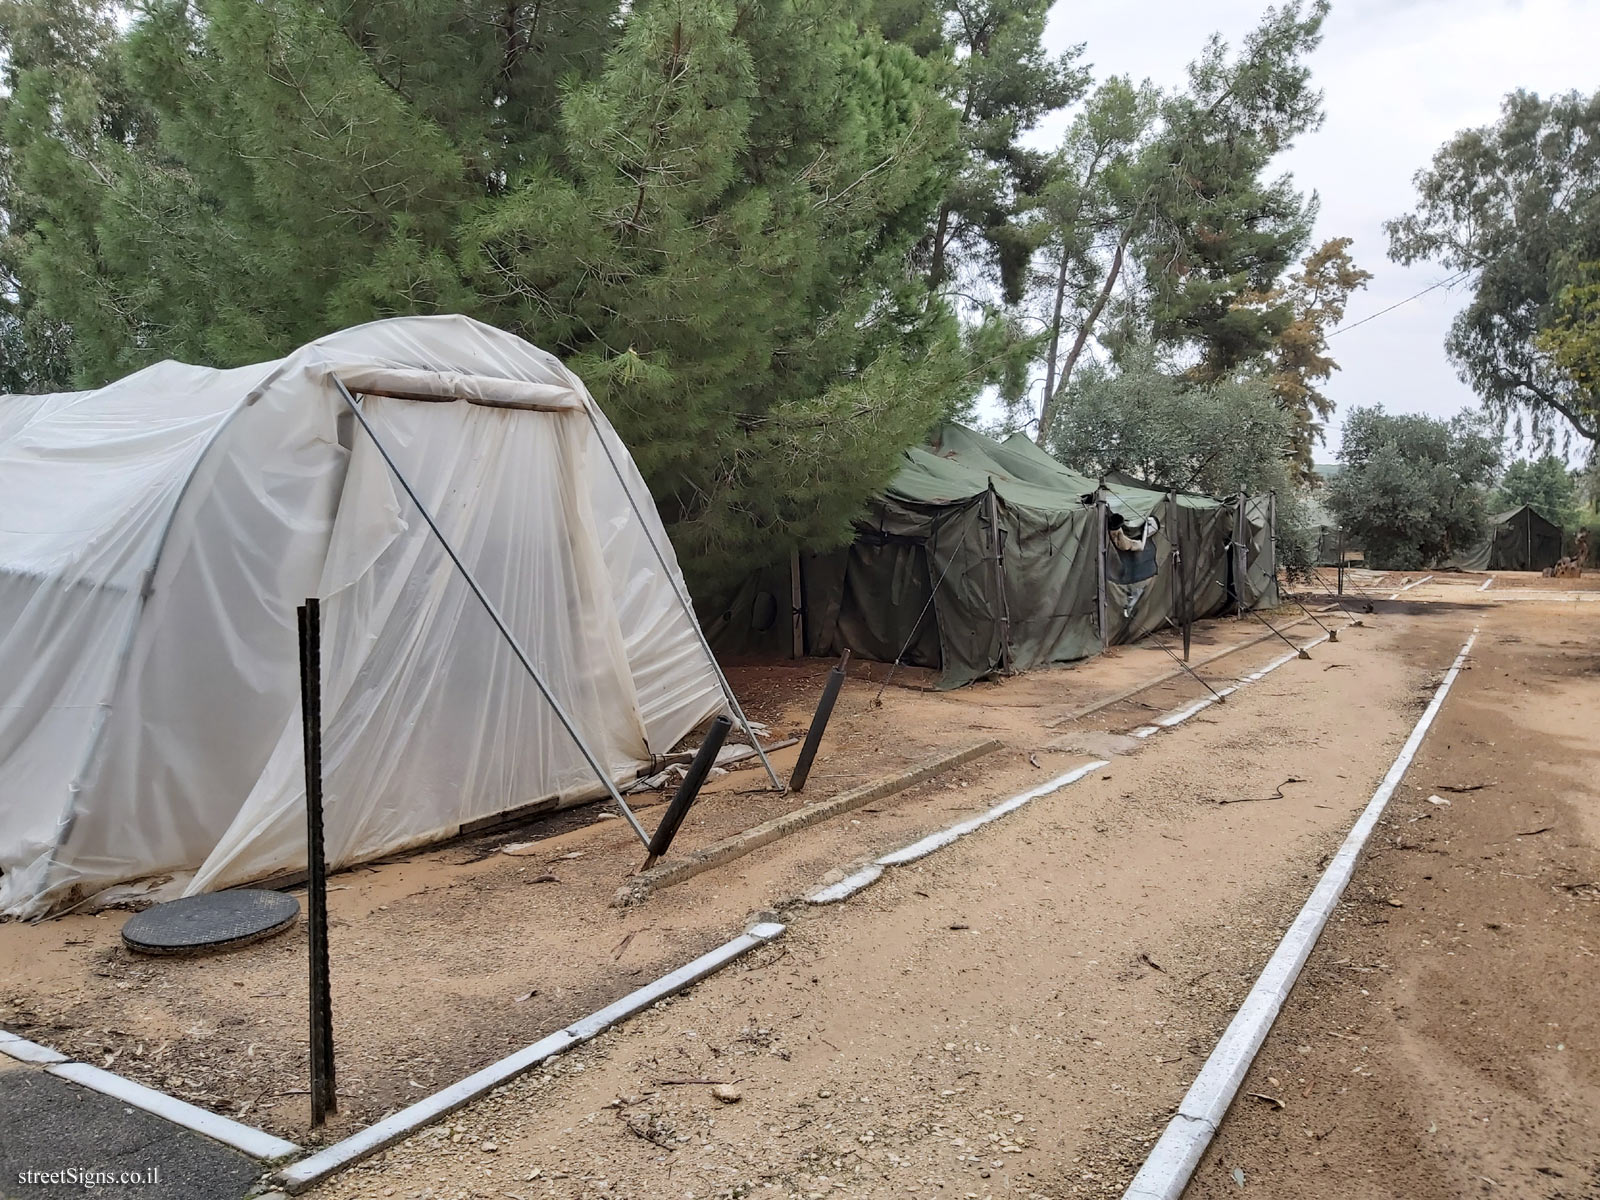 Rehovot - Heritage Sites in Israel - Ayalon Institute - The tent camp - David Fikes St 1, Rehovot, Israel